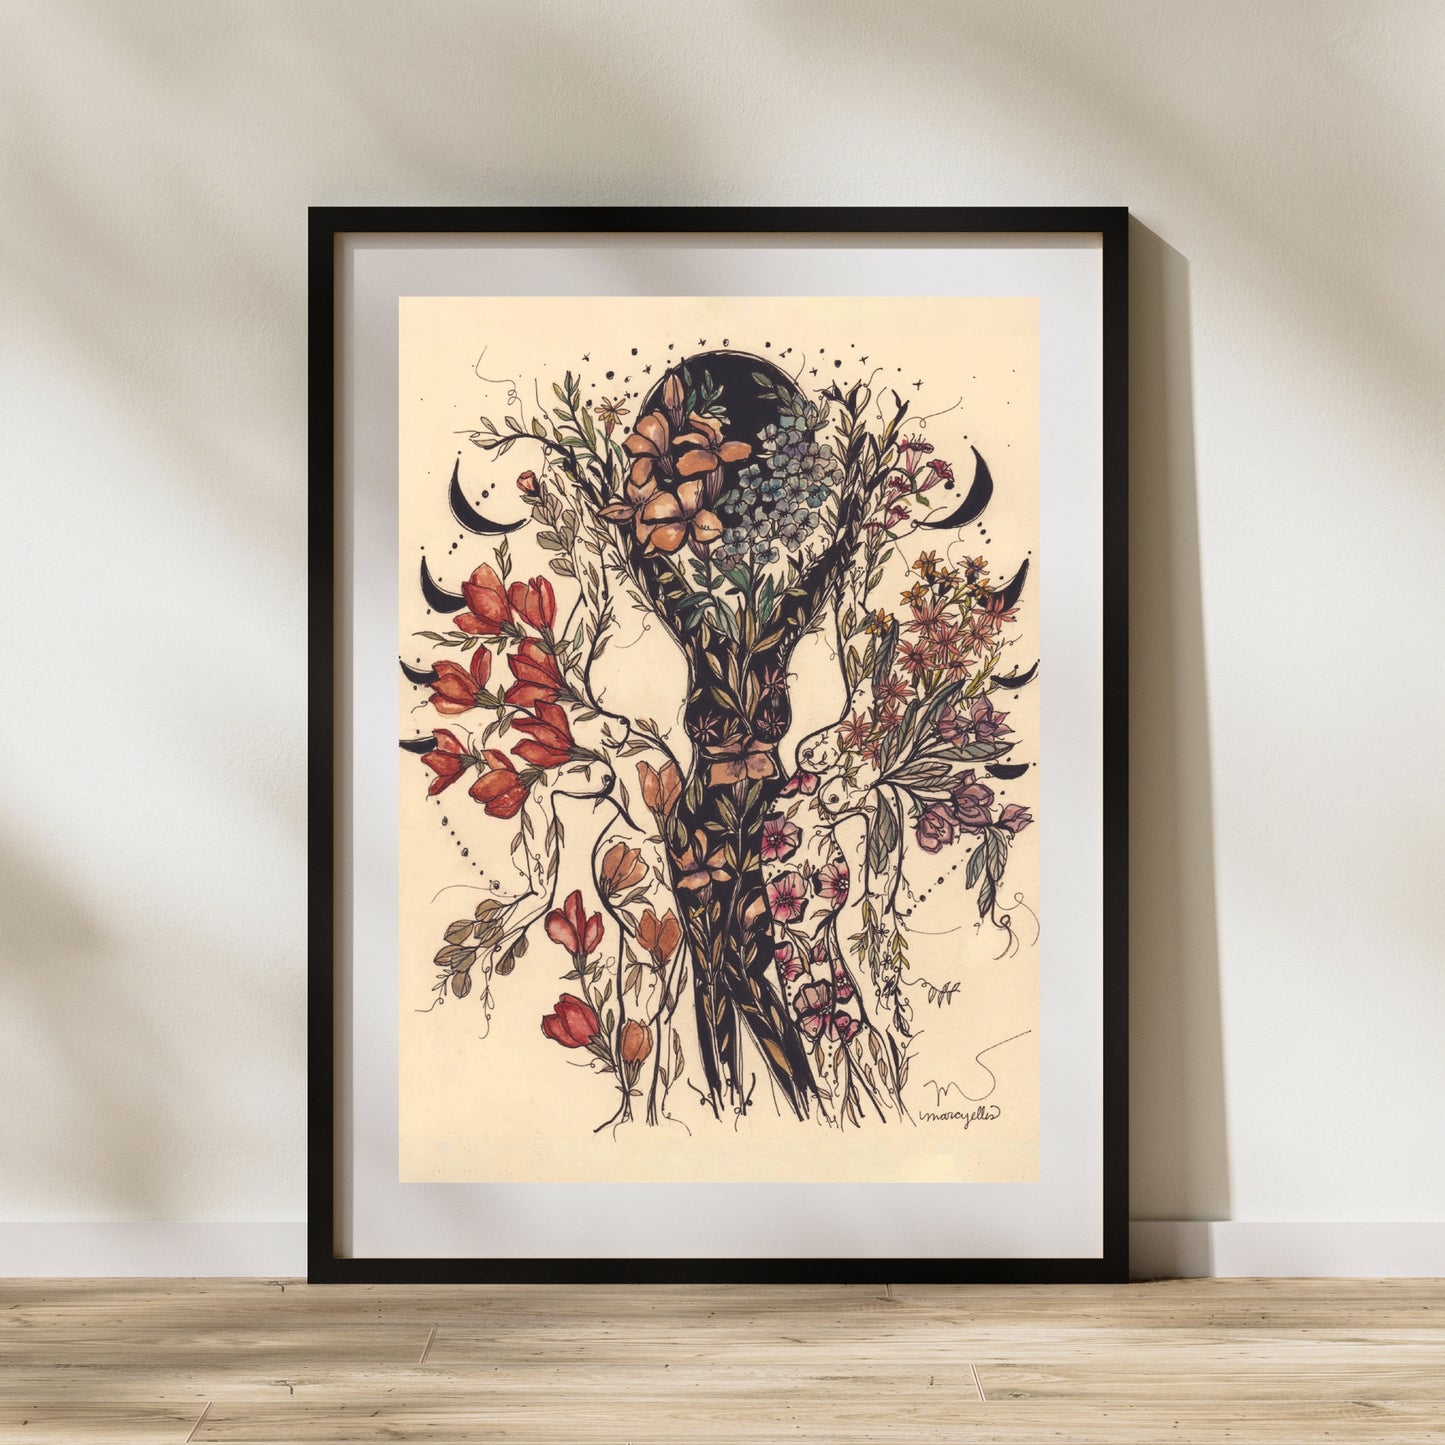 Change In Me, Signed, Giclèe Print